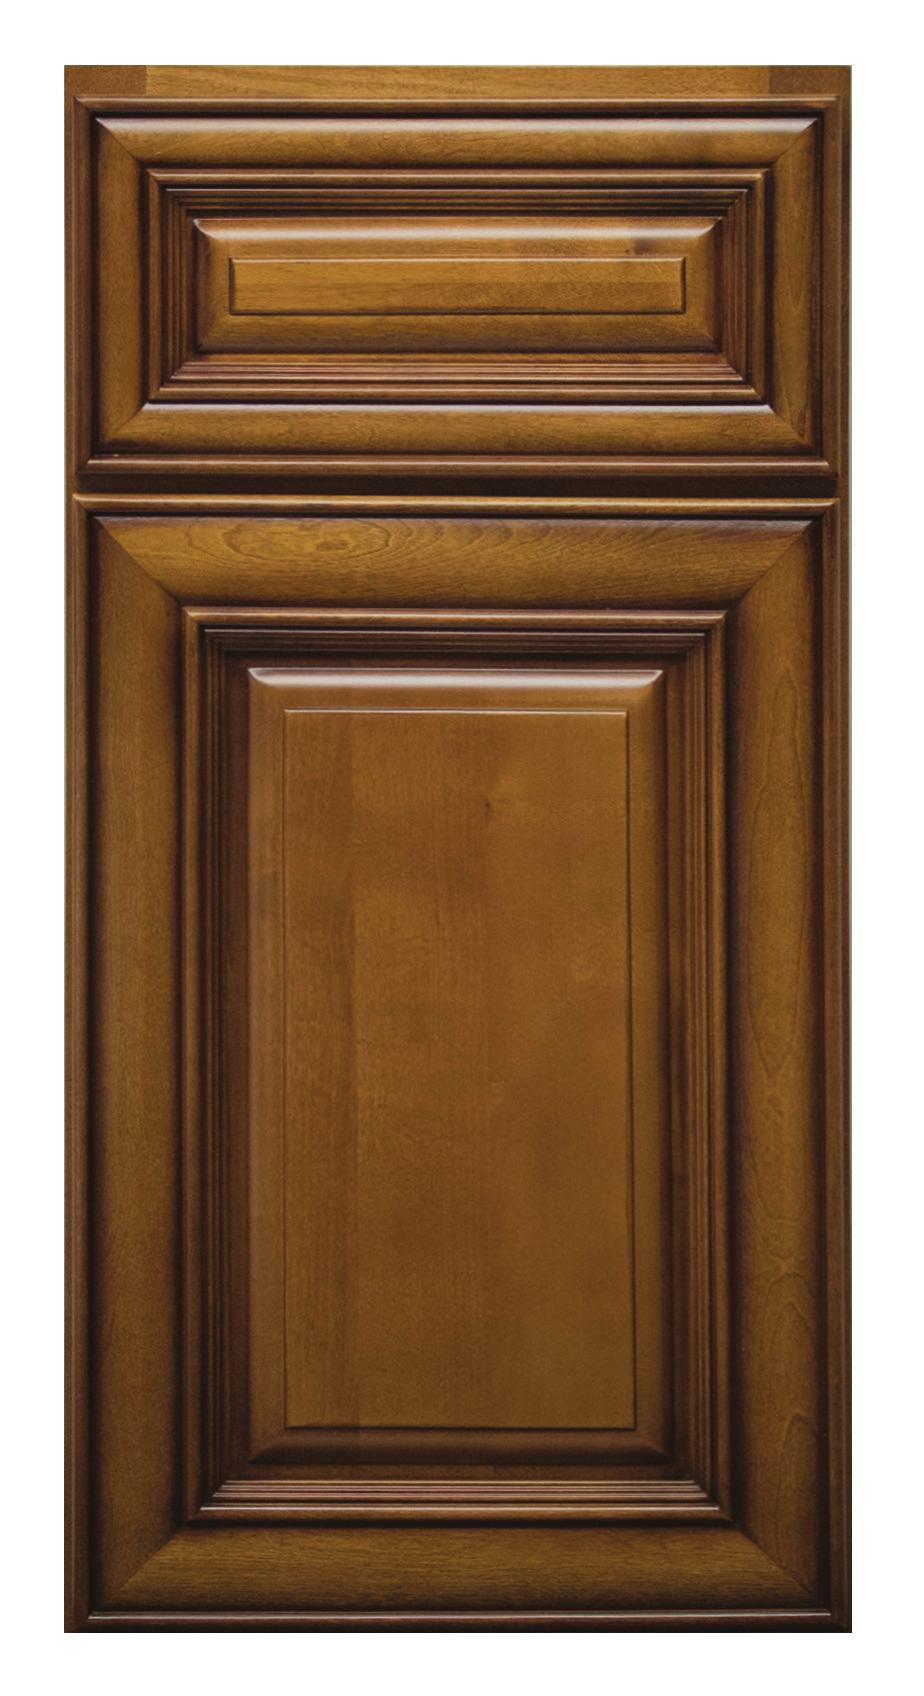 This traditional door style provides a truly custom look with its